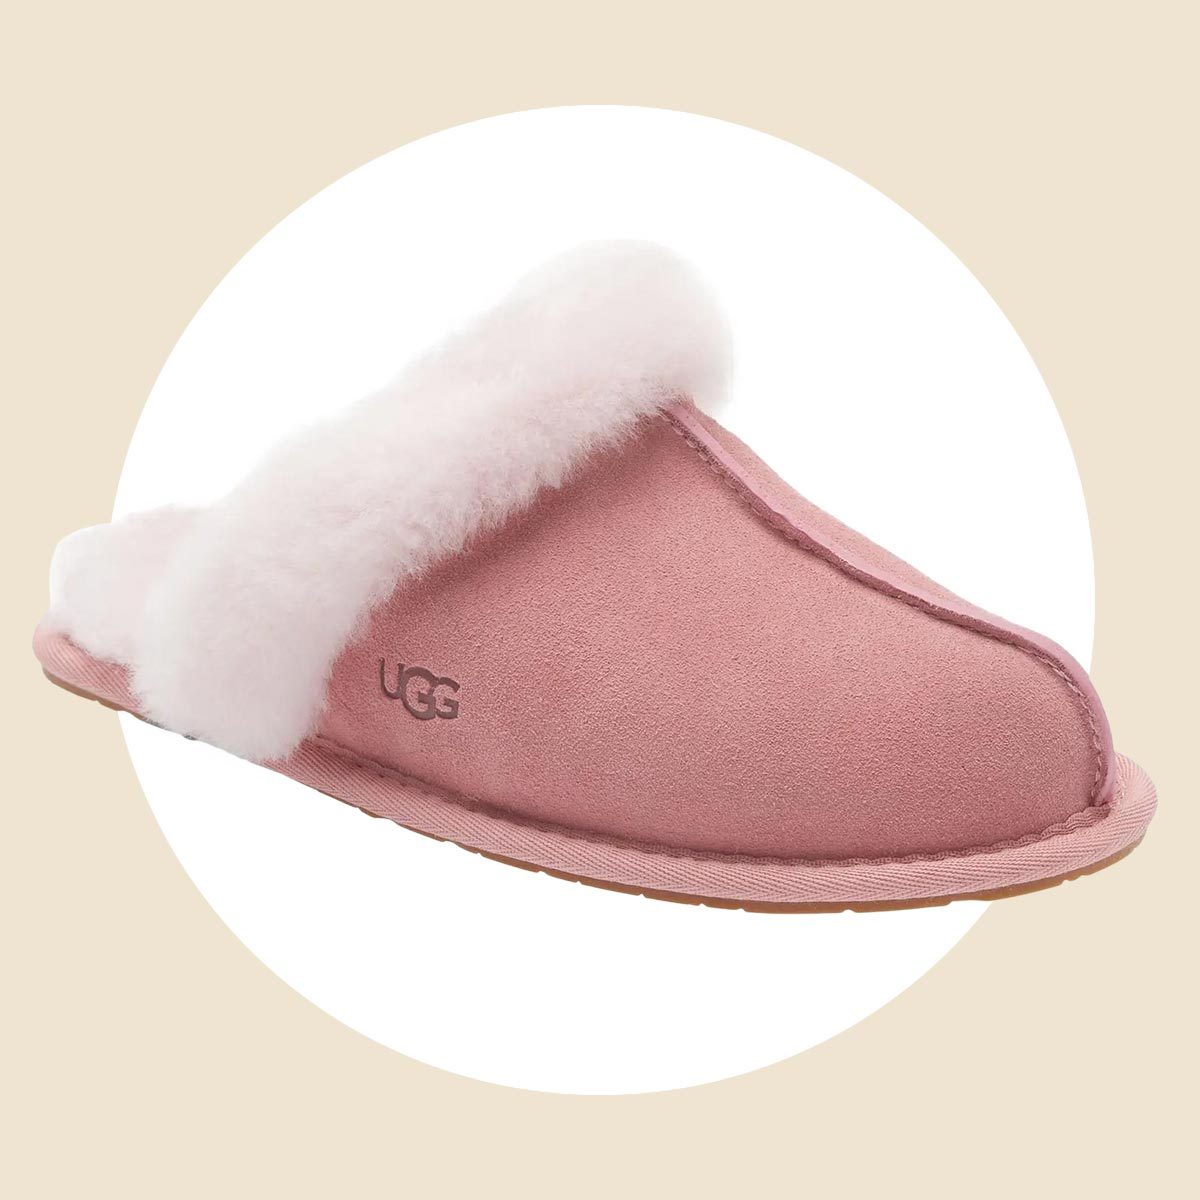 Water-resistant cozy UGG slippers